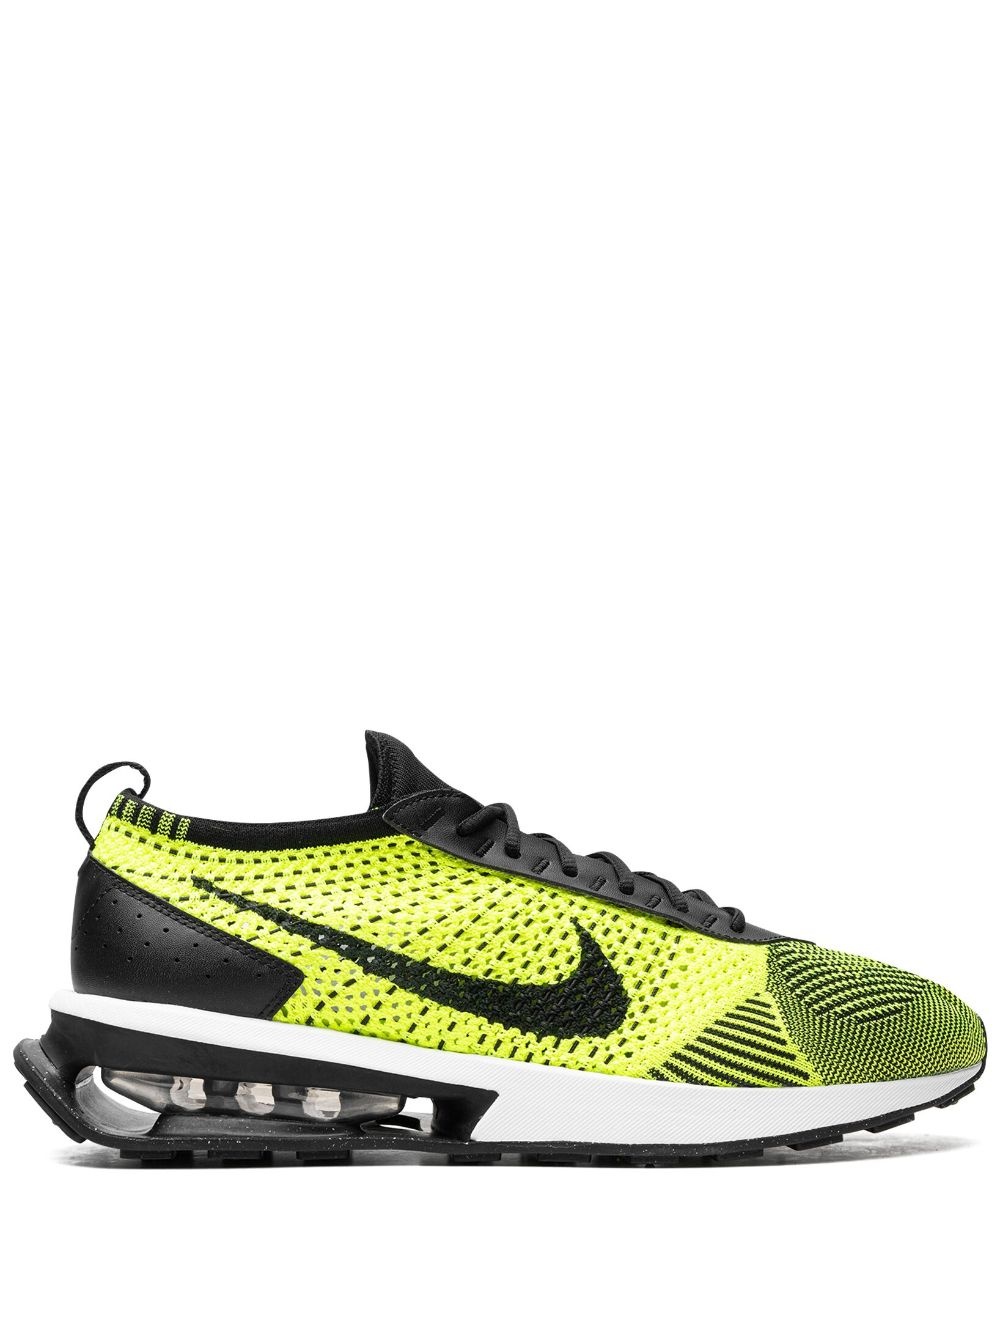 Air Max Flyknit Racer "Volt/Black" sneakers - 1